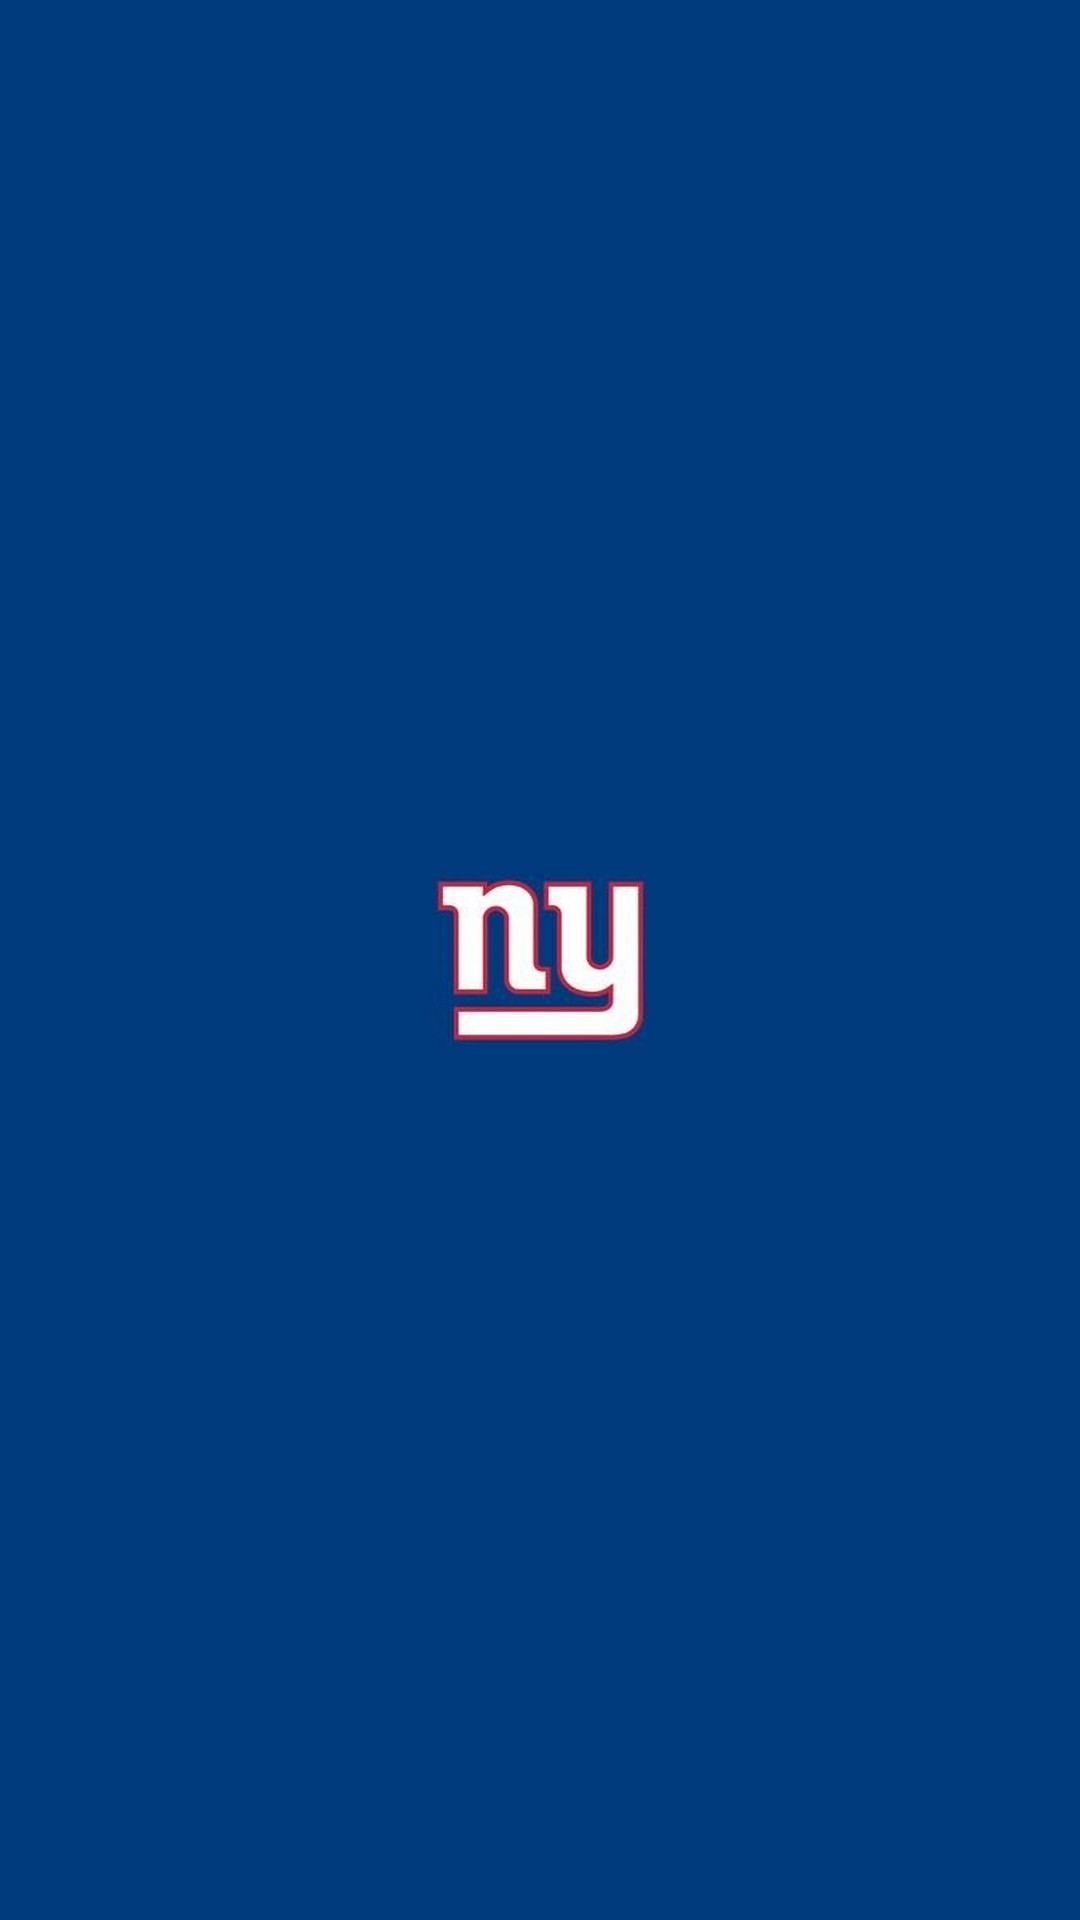 New York Giants iPhone X Wallpaper with high-resolution 1080x1920 pixel. Download and set as wallpaper for Desktop Computer, Apple iPhone X, XS Max, XR, 8, 7, 6, SE, iPad, Android